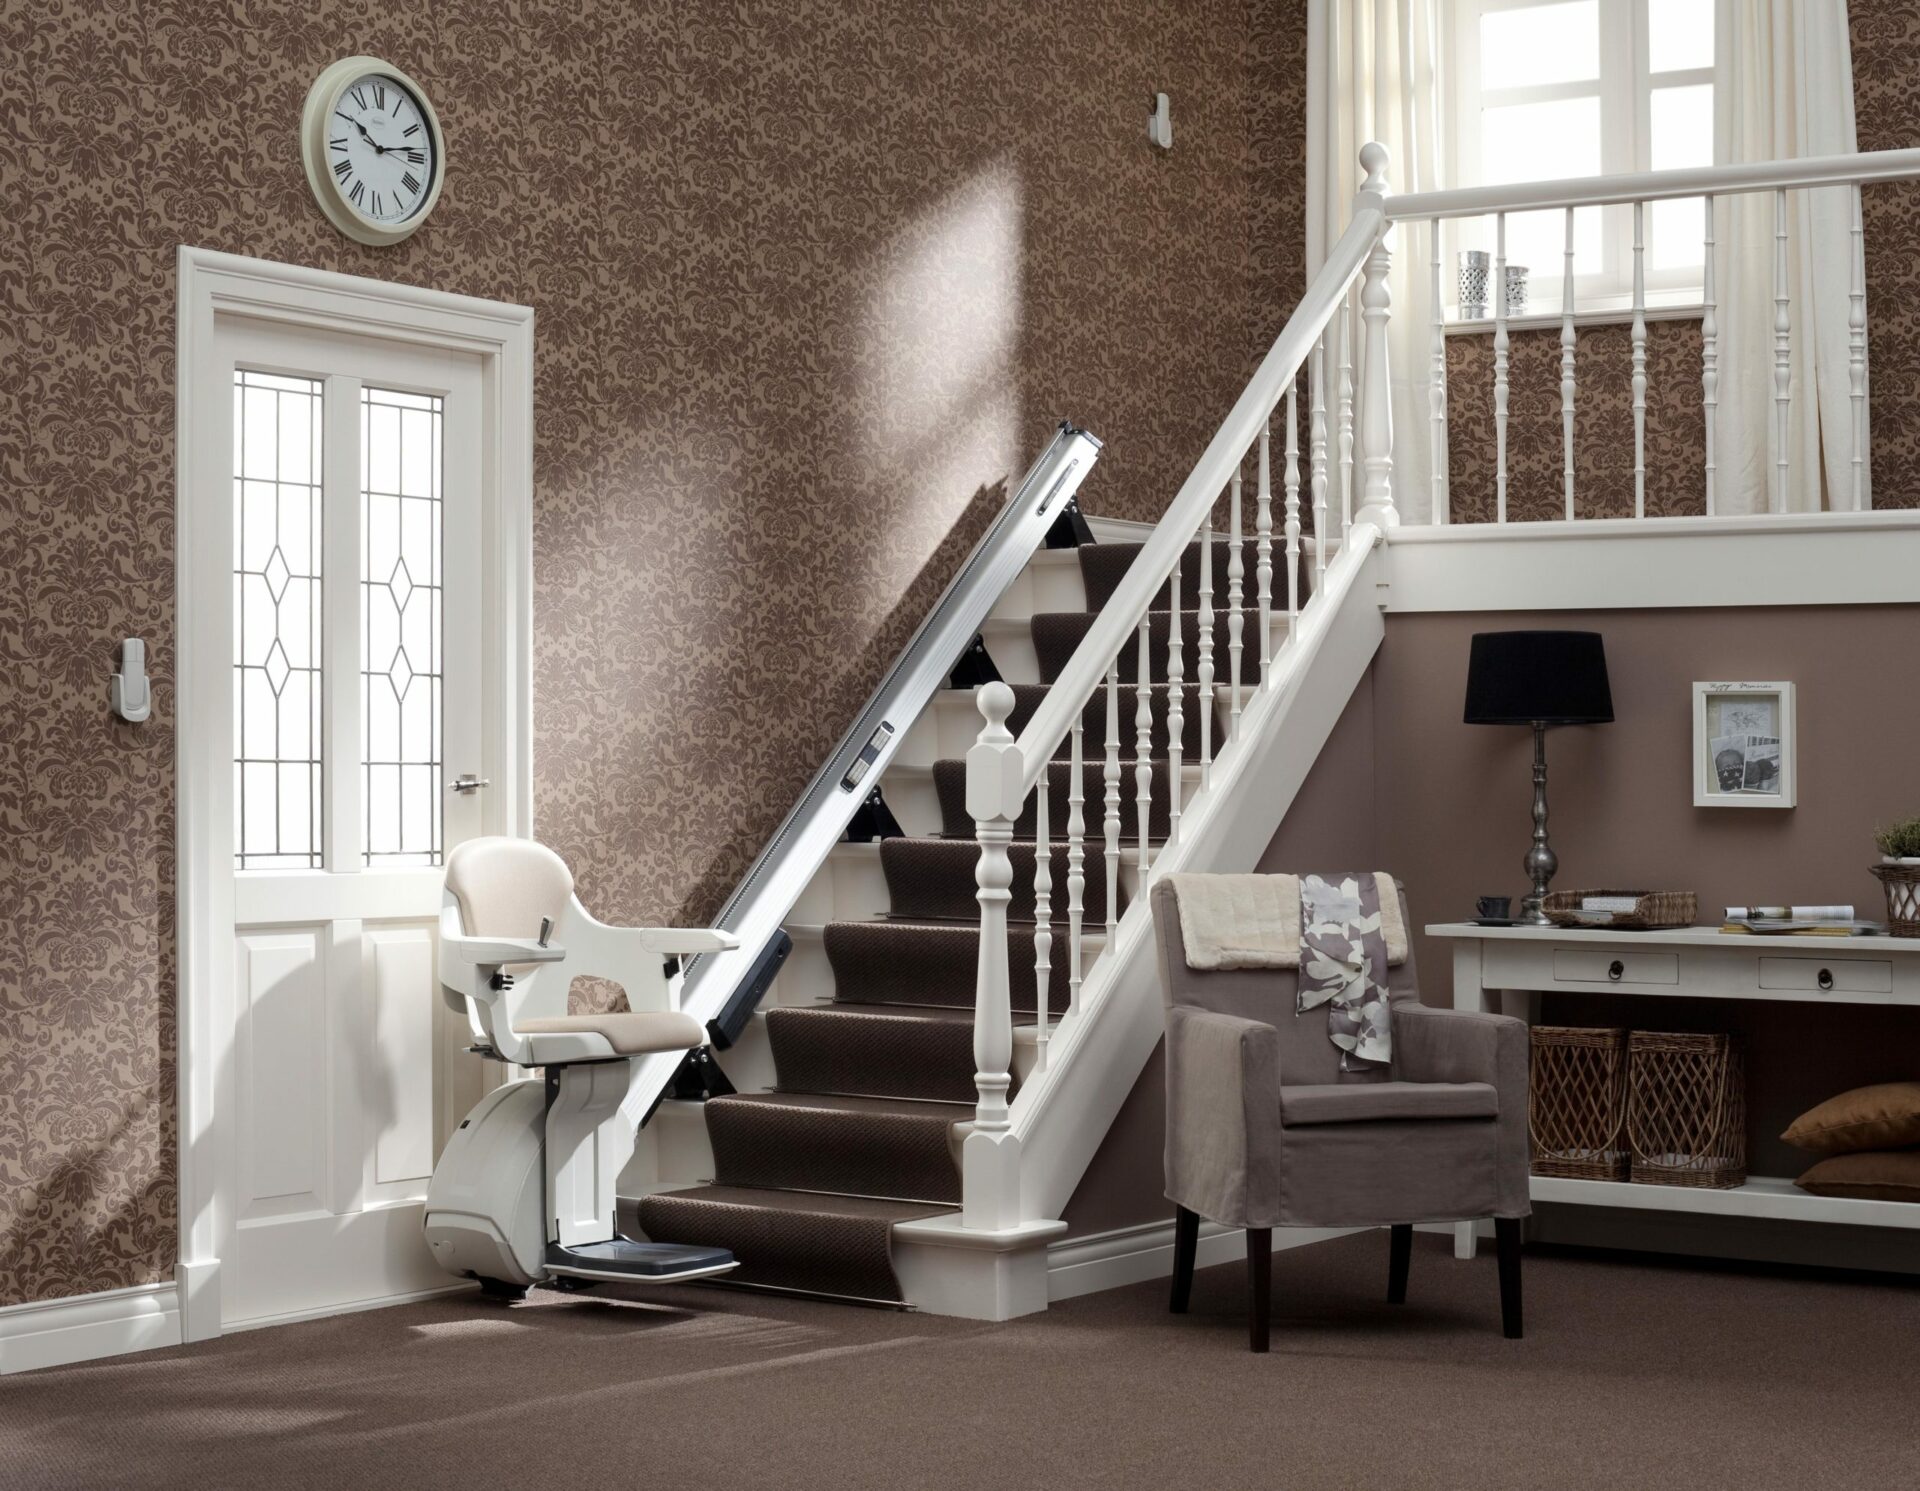 HomeGlide stairlift pic 2